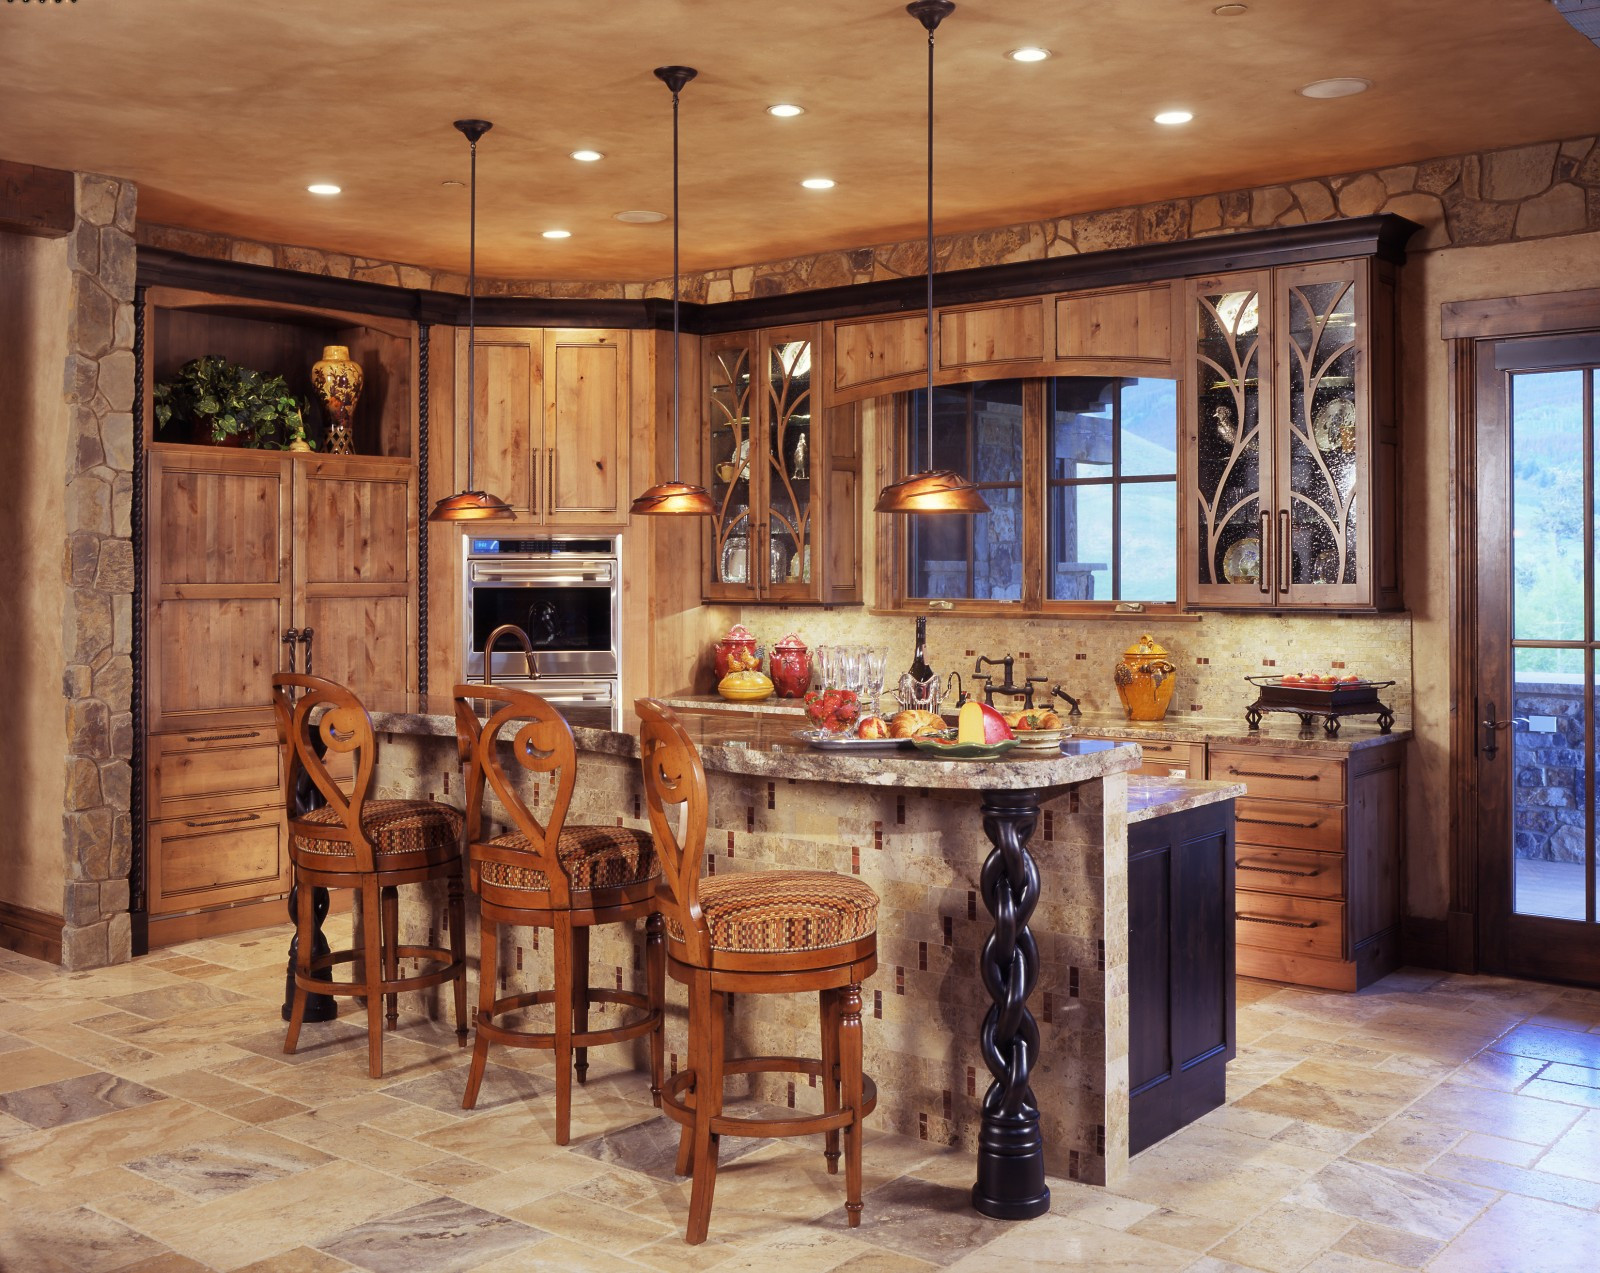 Kitchen Cabinet Rustic
 Enchanting Rustic Kitchen Cabinets Creating Glorious